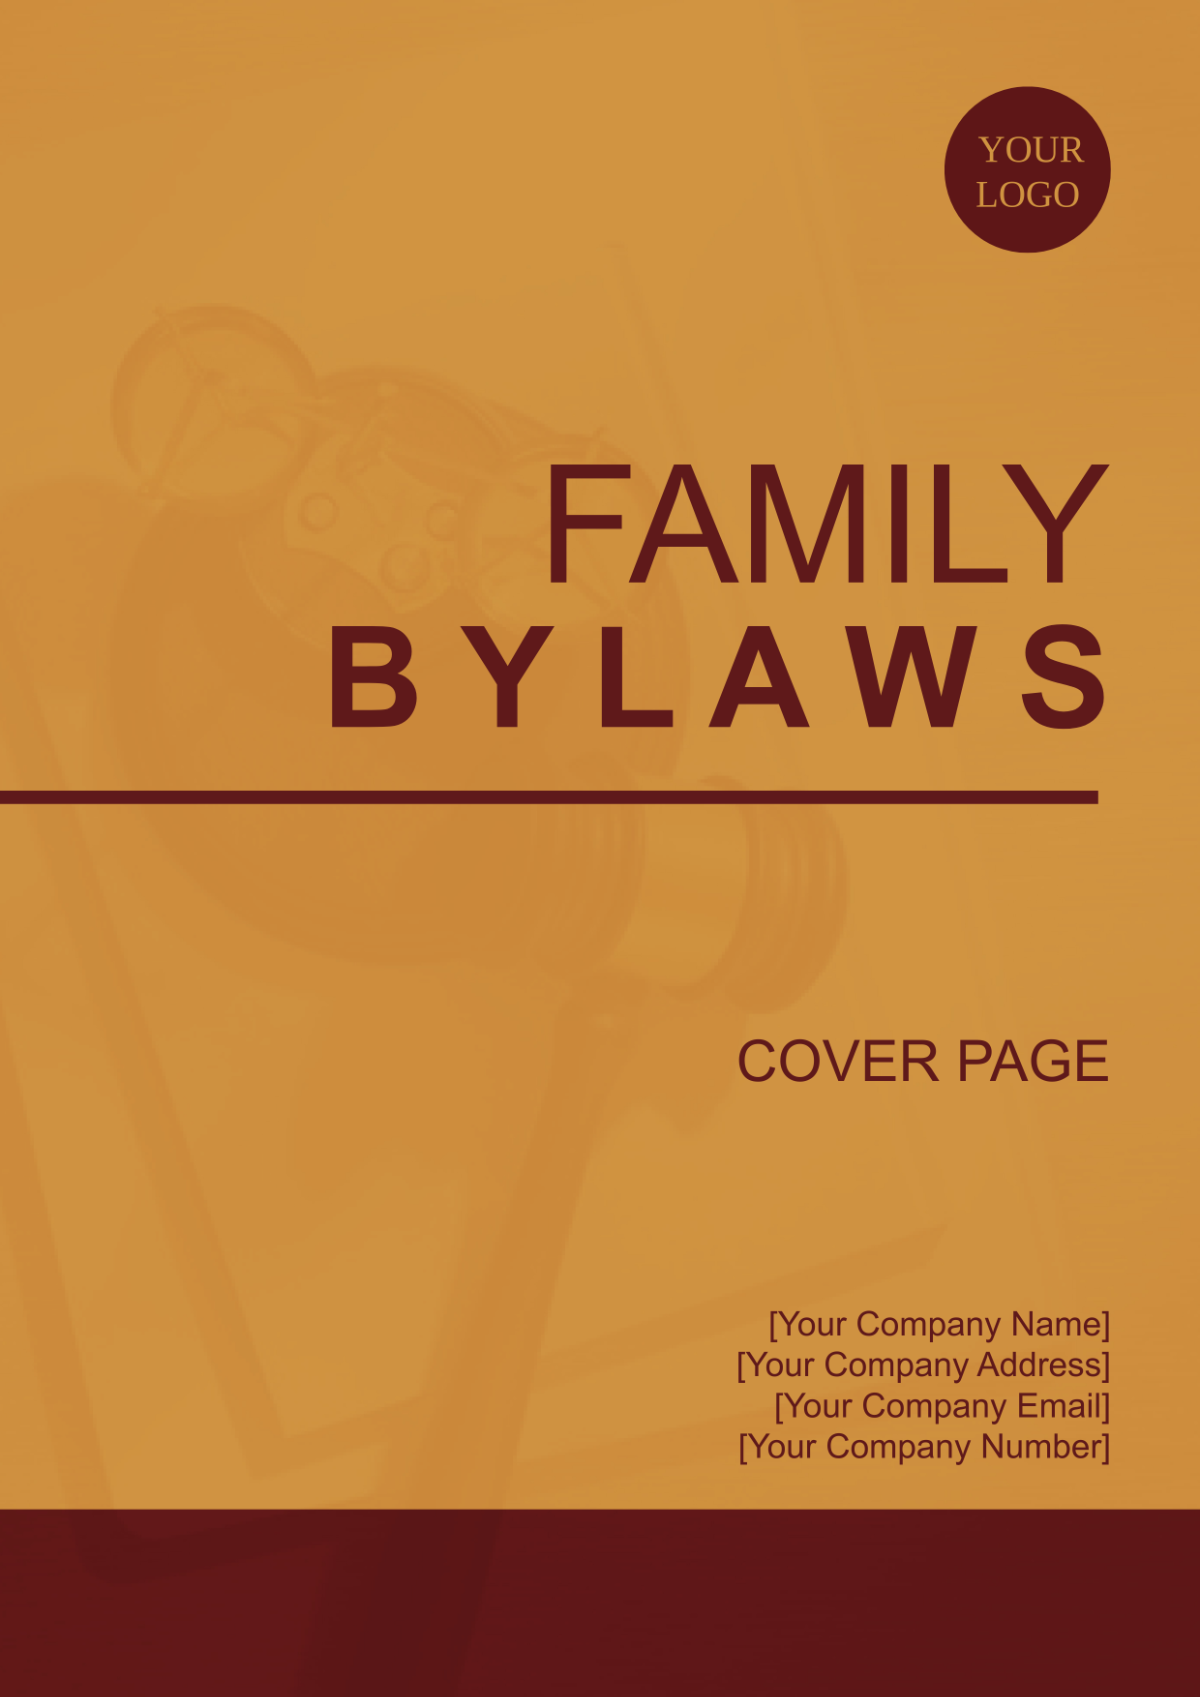 Family Bylaws Cover Page